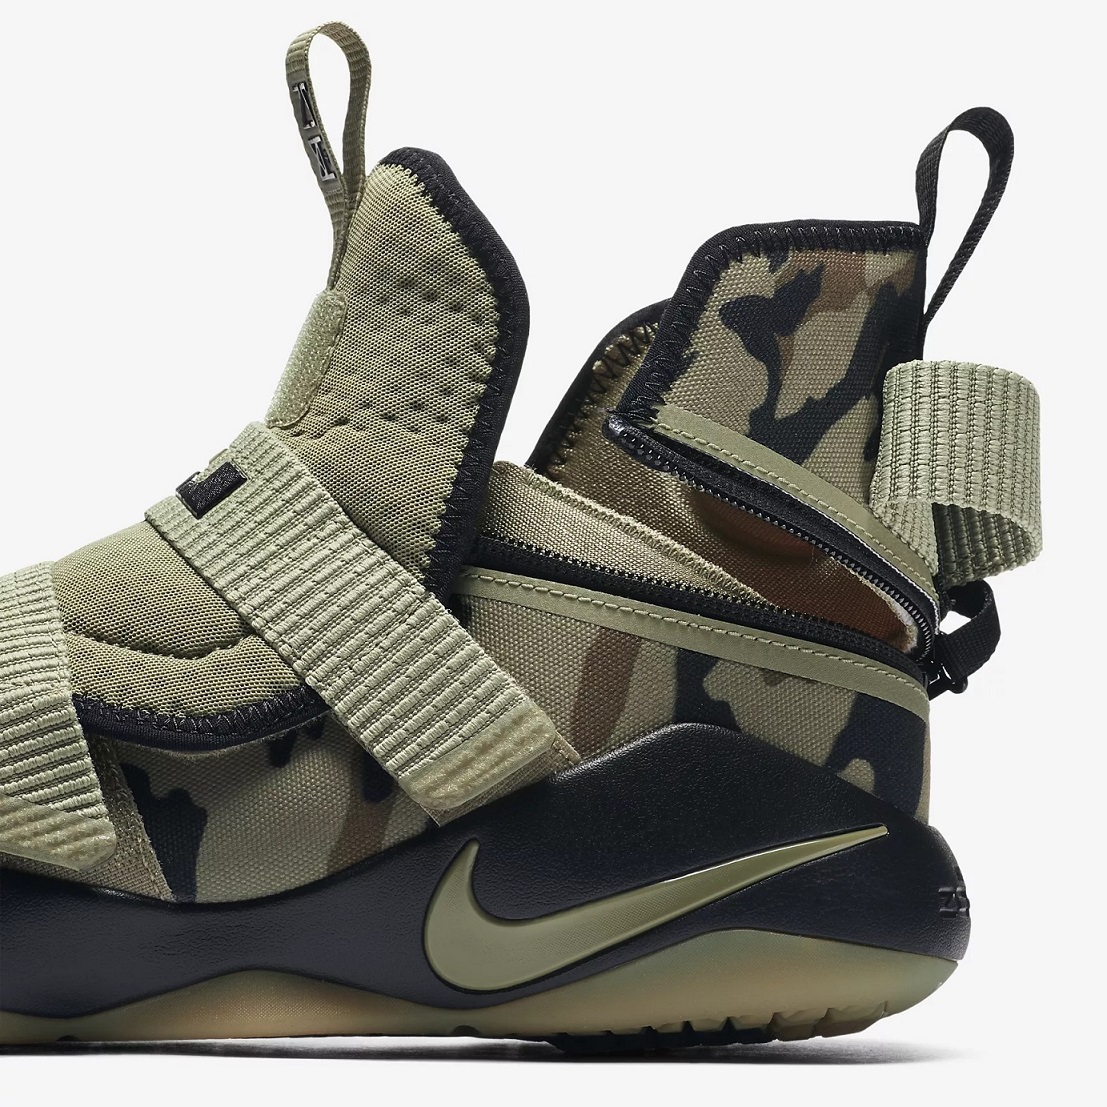 lebron soldier 11 flyease review